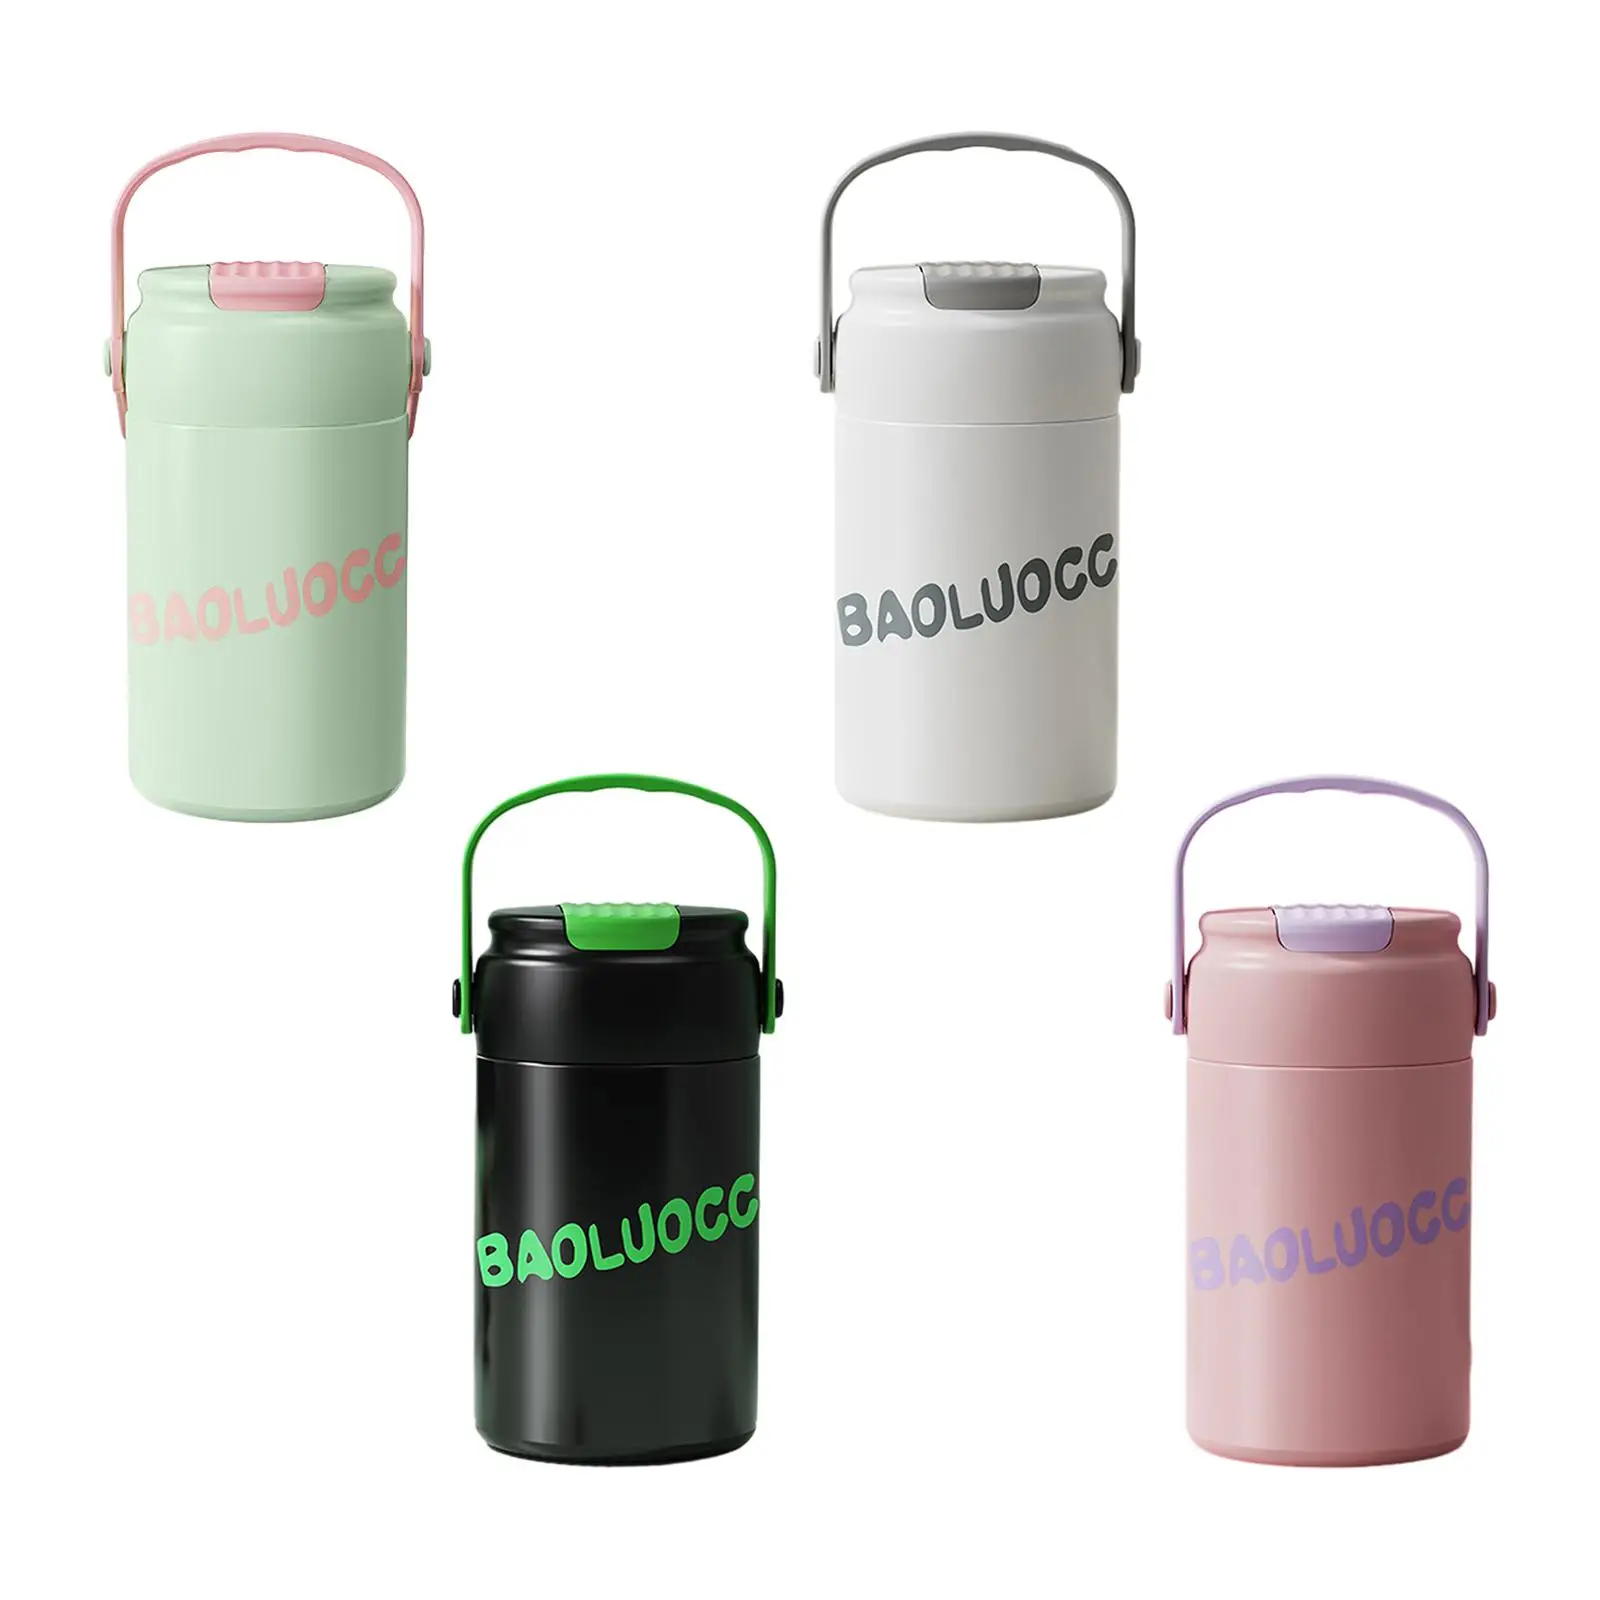 Insulated Coffee Travel Mug 550ml with Lids Straws Portable Drinkware Cold Drinks Cup Mug for Home Biking Outgoing Party Office